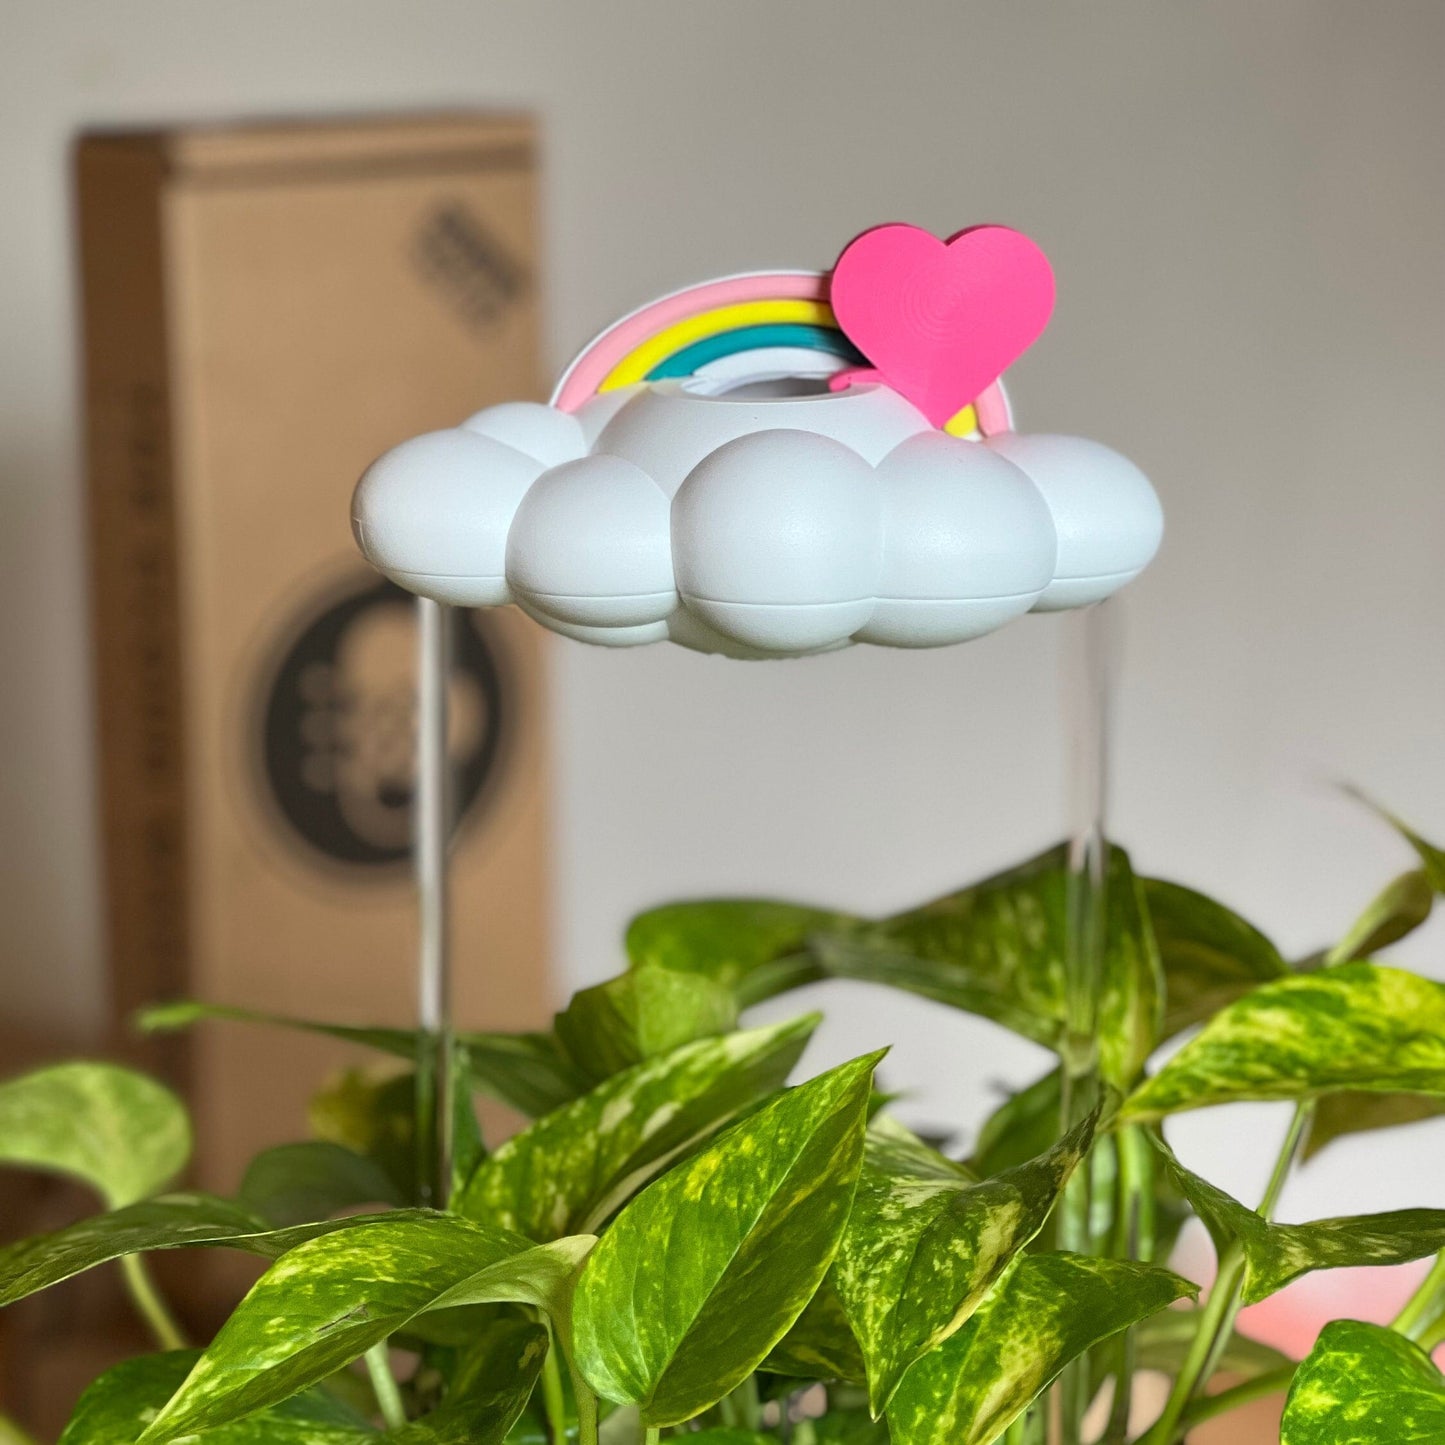 original Dripping Rain Cloud with Pastel rainbow and pink heart charms